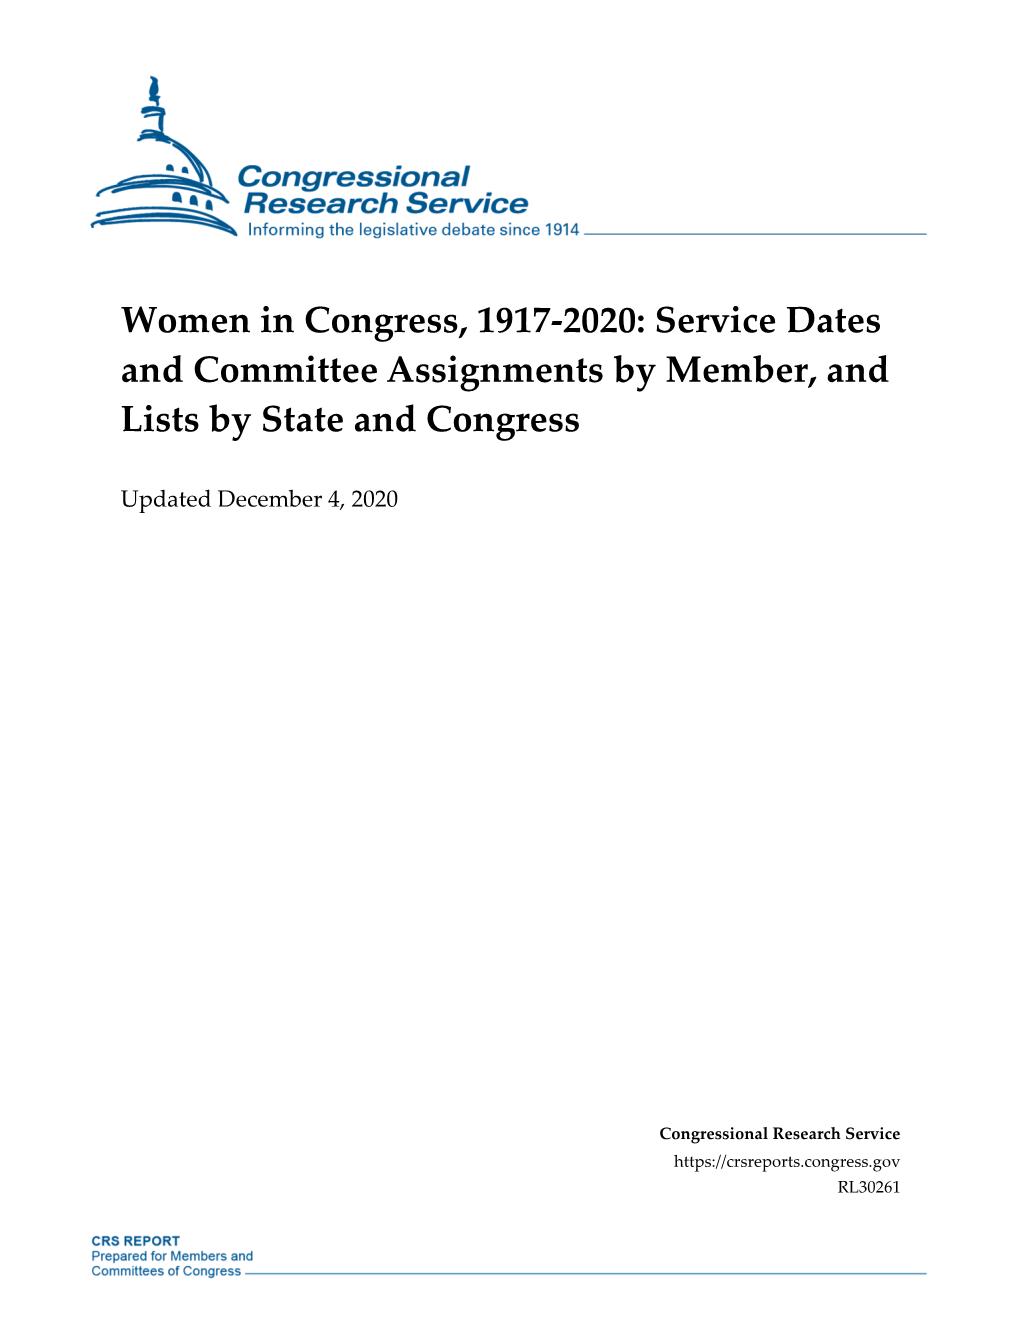 Women in Congress, 1917-2020: Service Dates and Committee Assignments by Member, and Lists by State and Congress